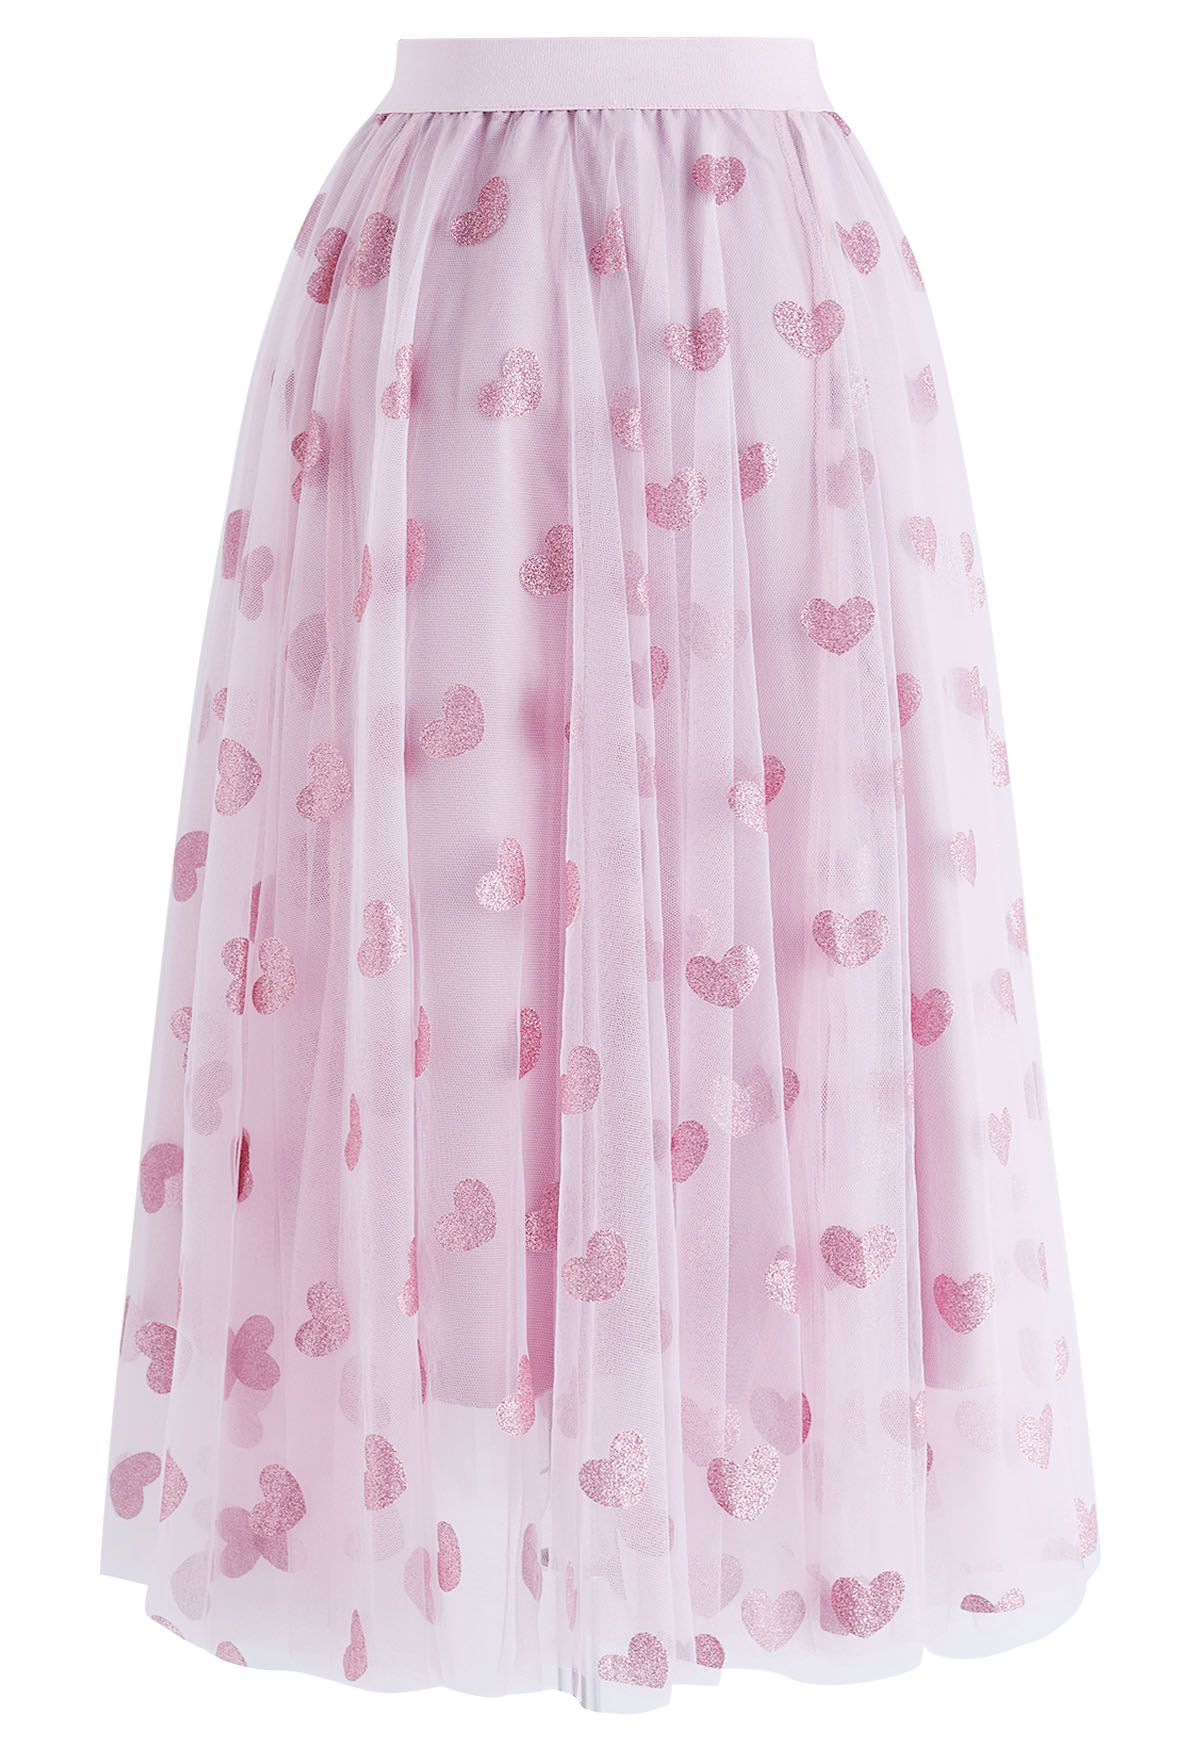 Shimmering Hearts Mesh Tulle Midi Skirt in Pink | Chicwish